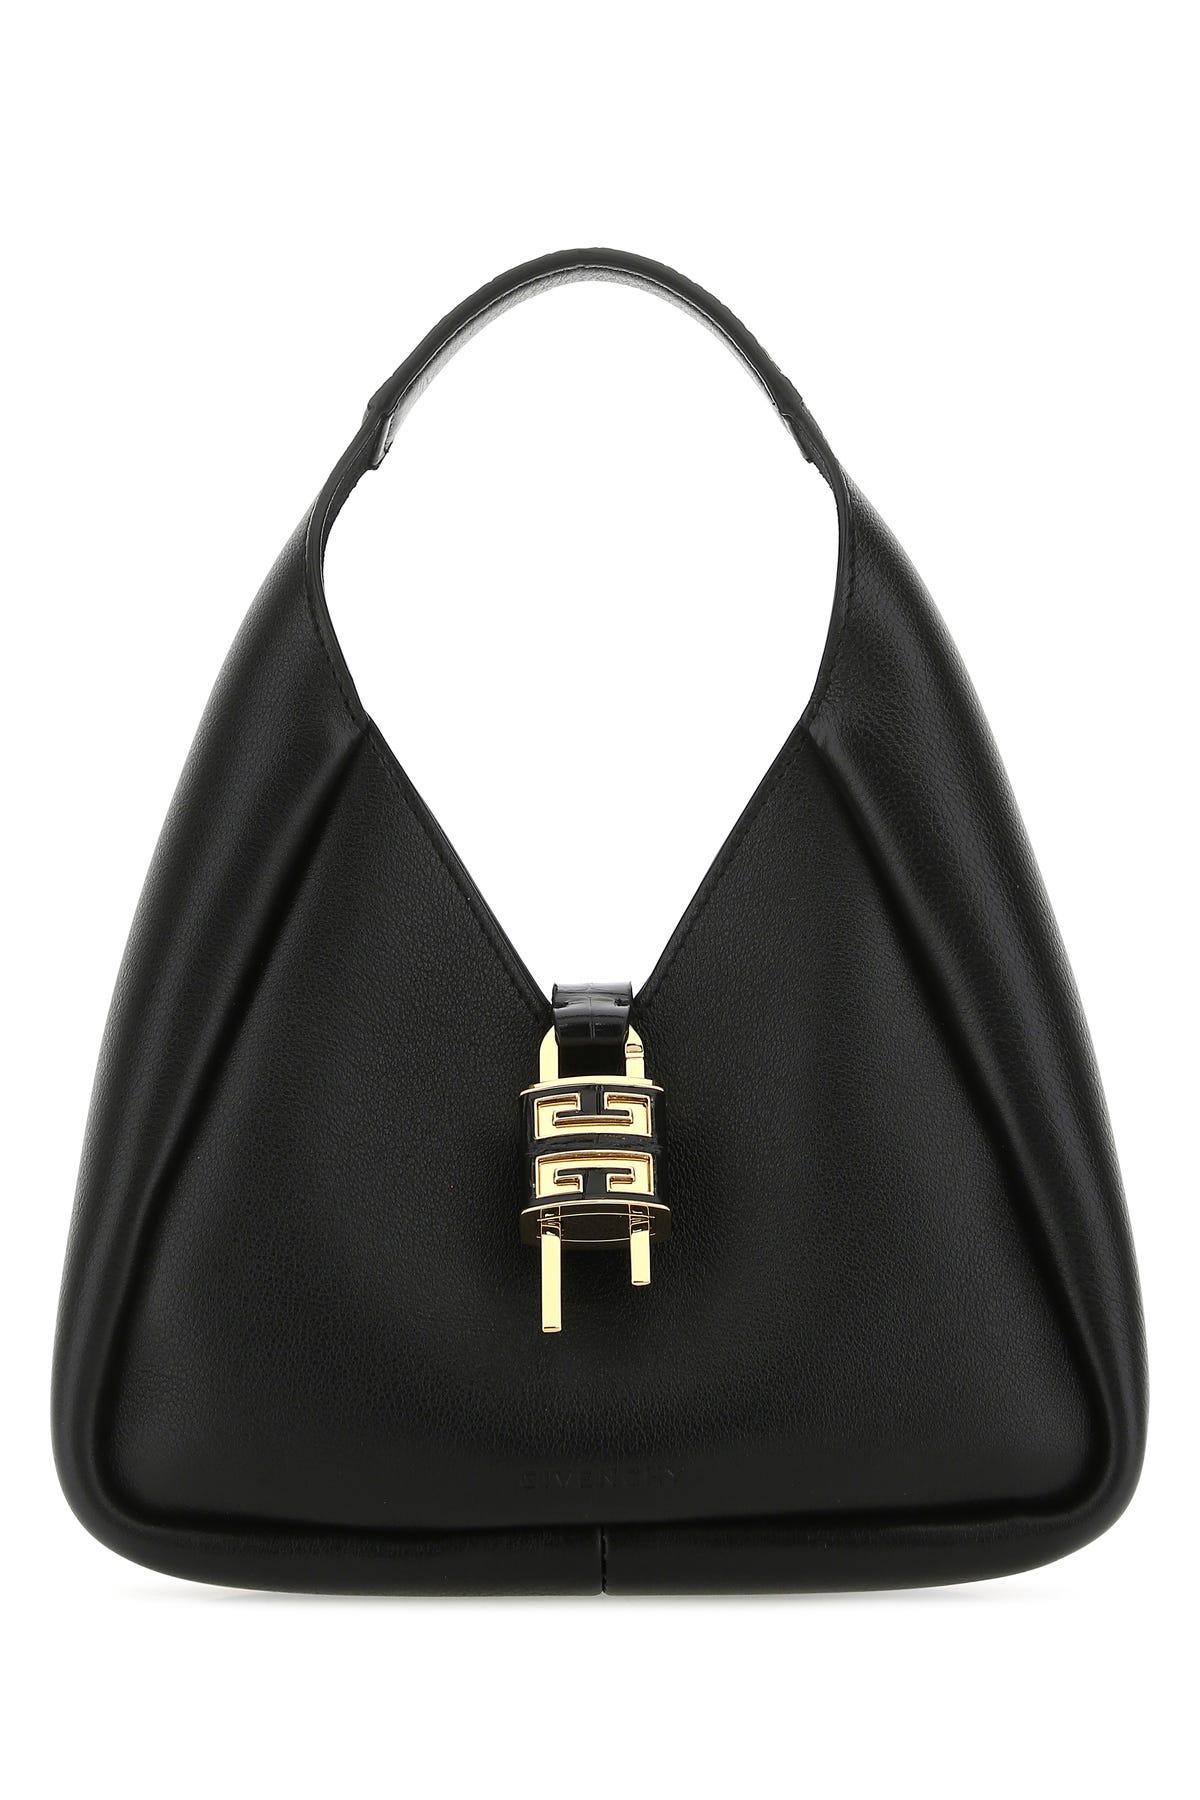 Givenchy Leather G-hobo Ha in Black | Lyst